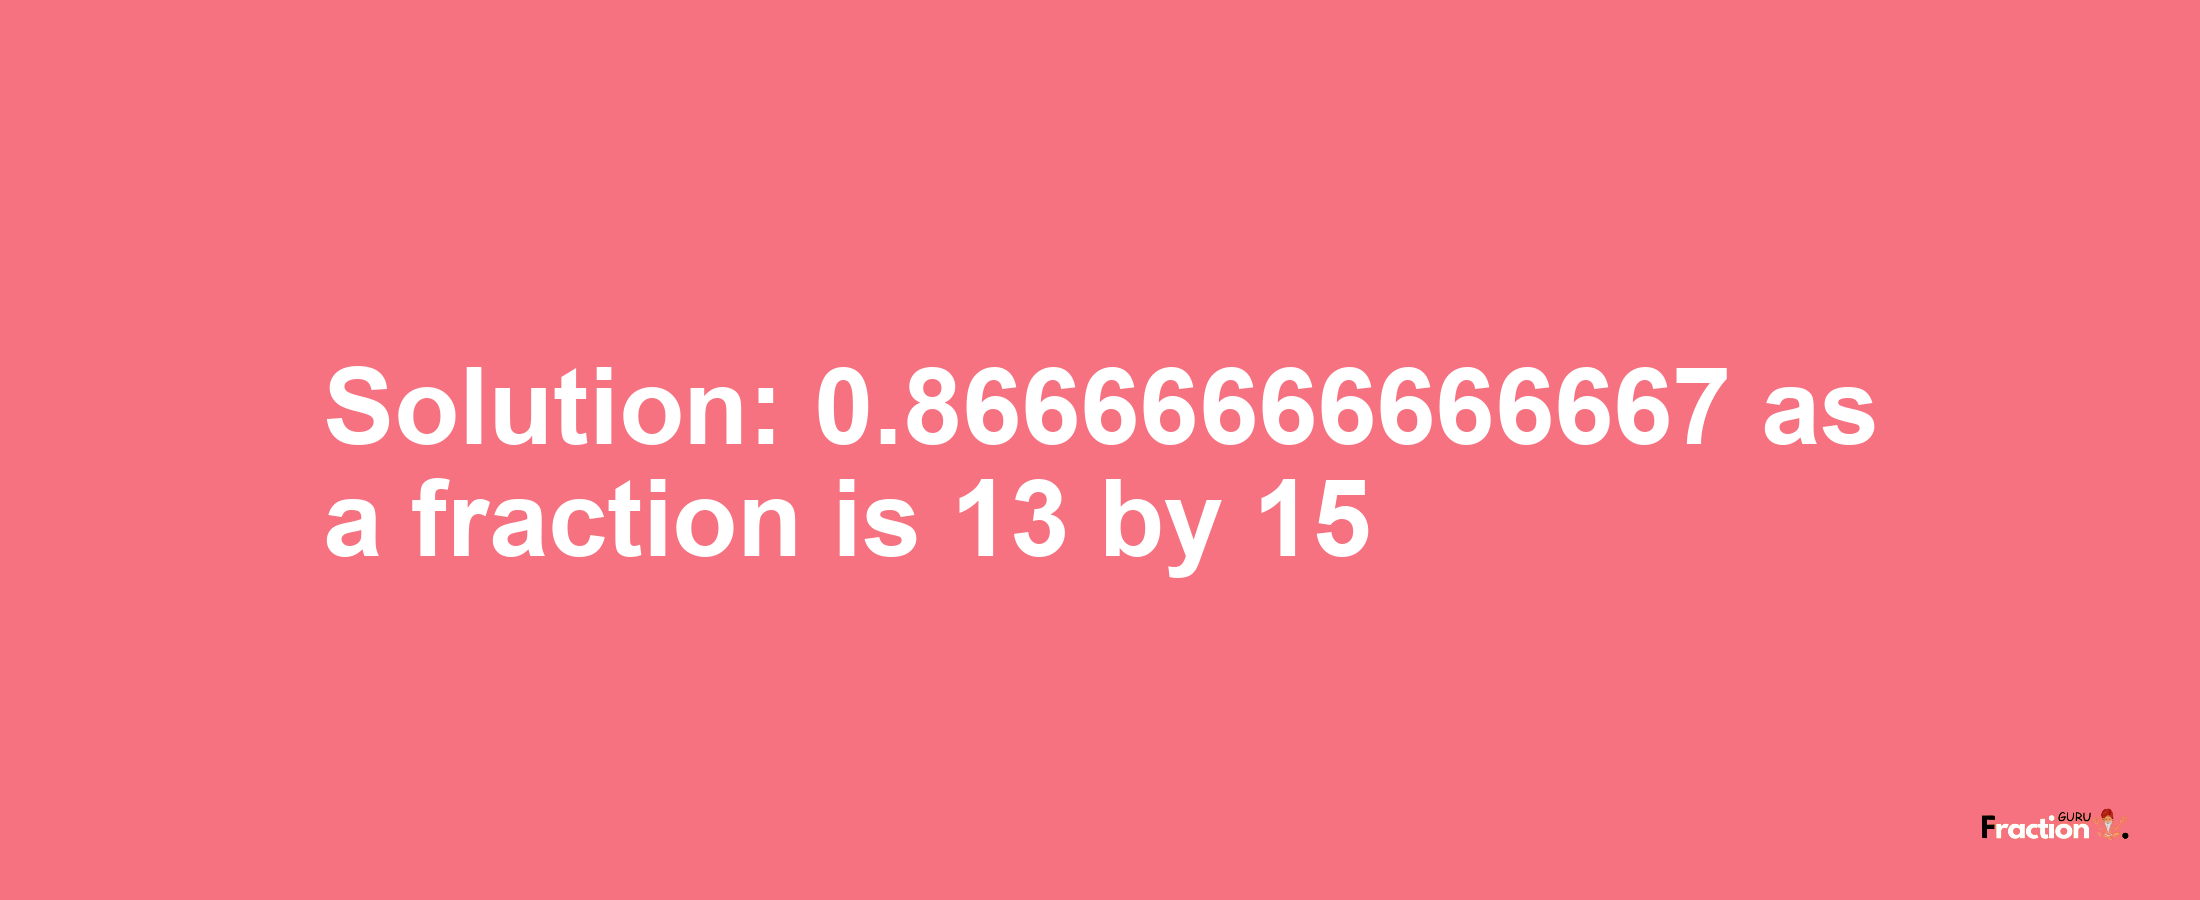 Solution:0.86666666666667 as a fraction is 13/15